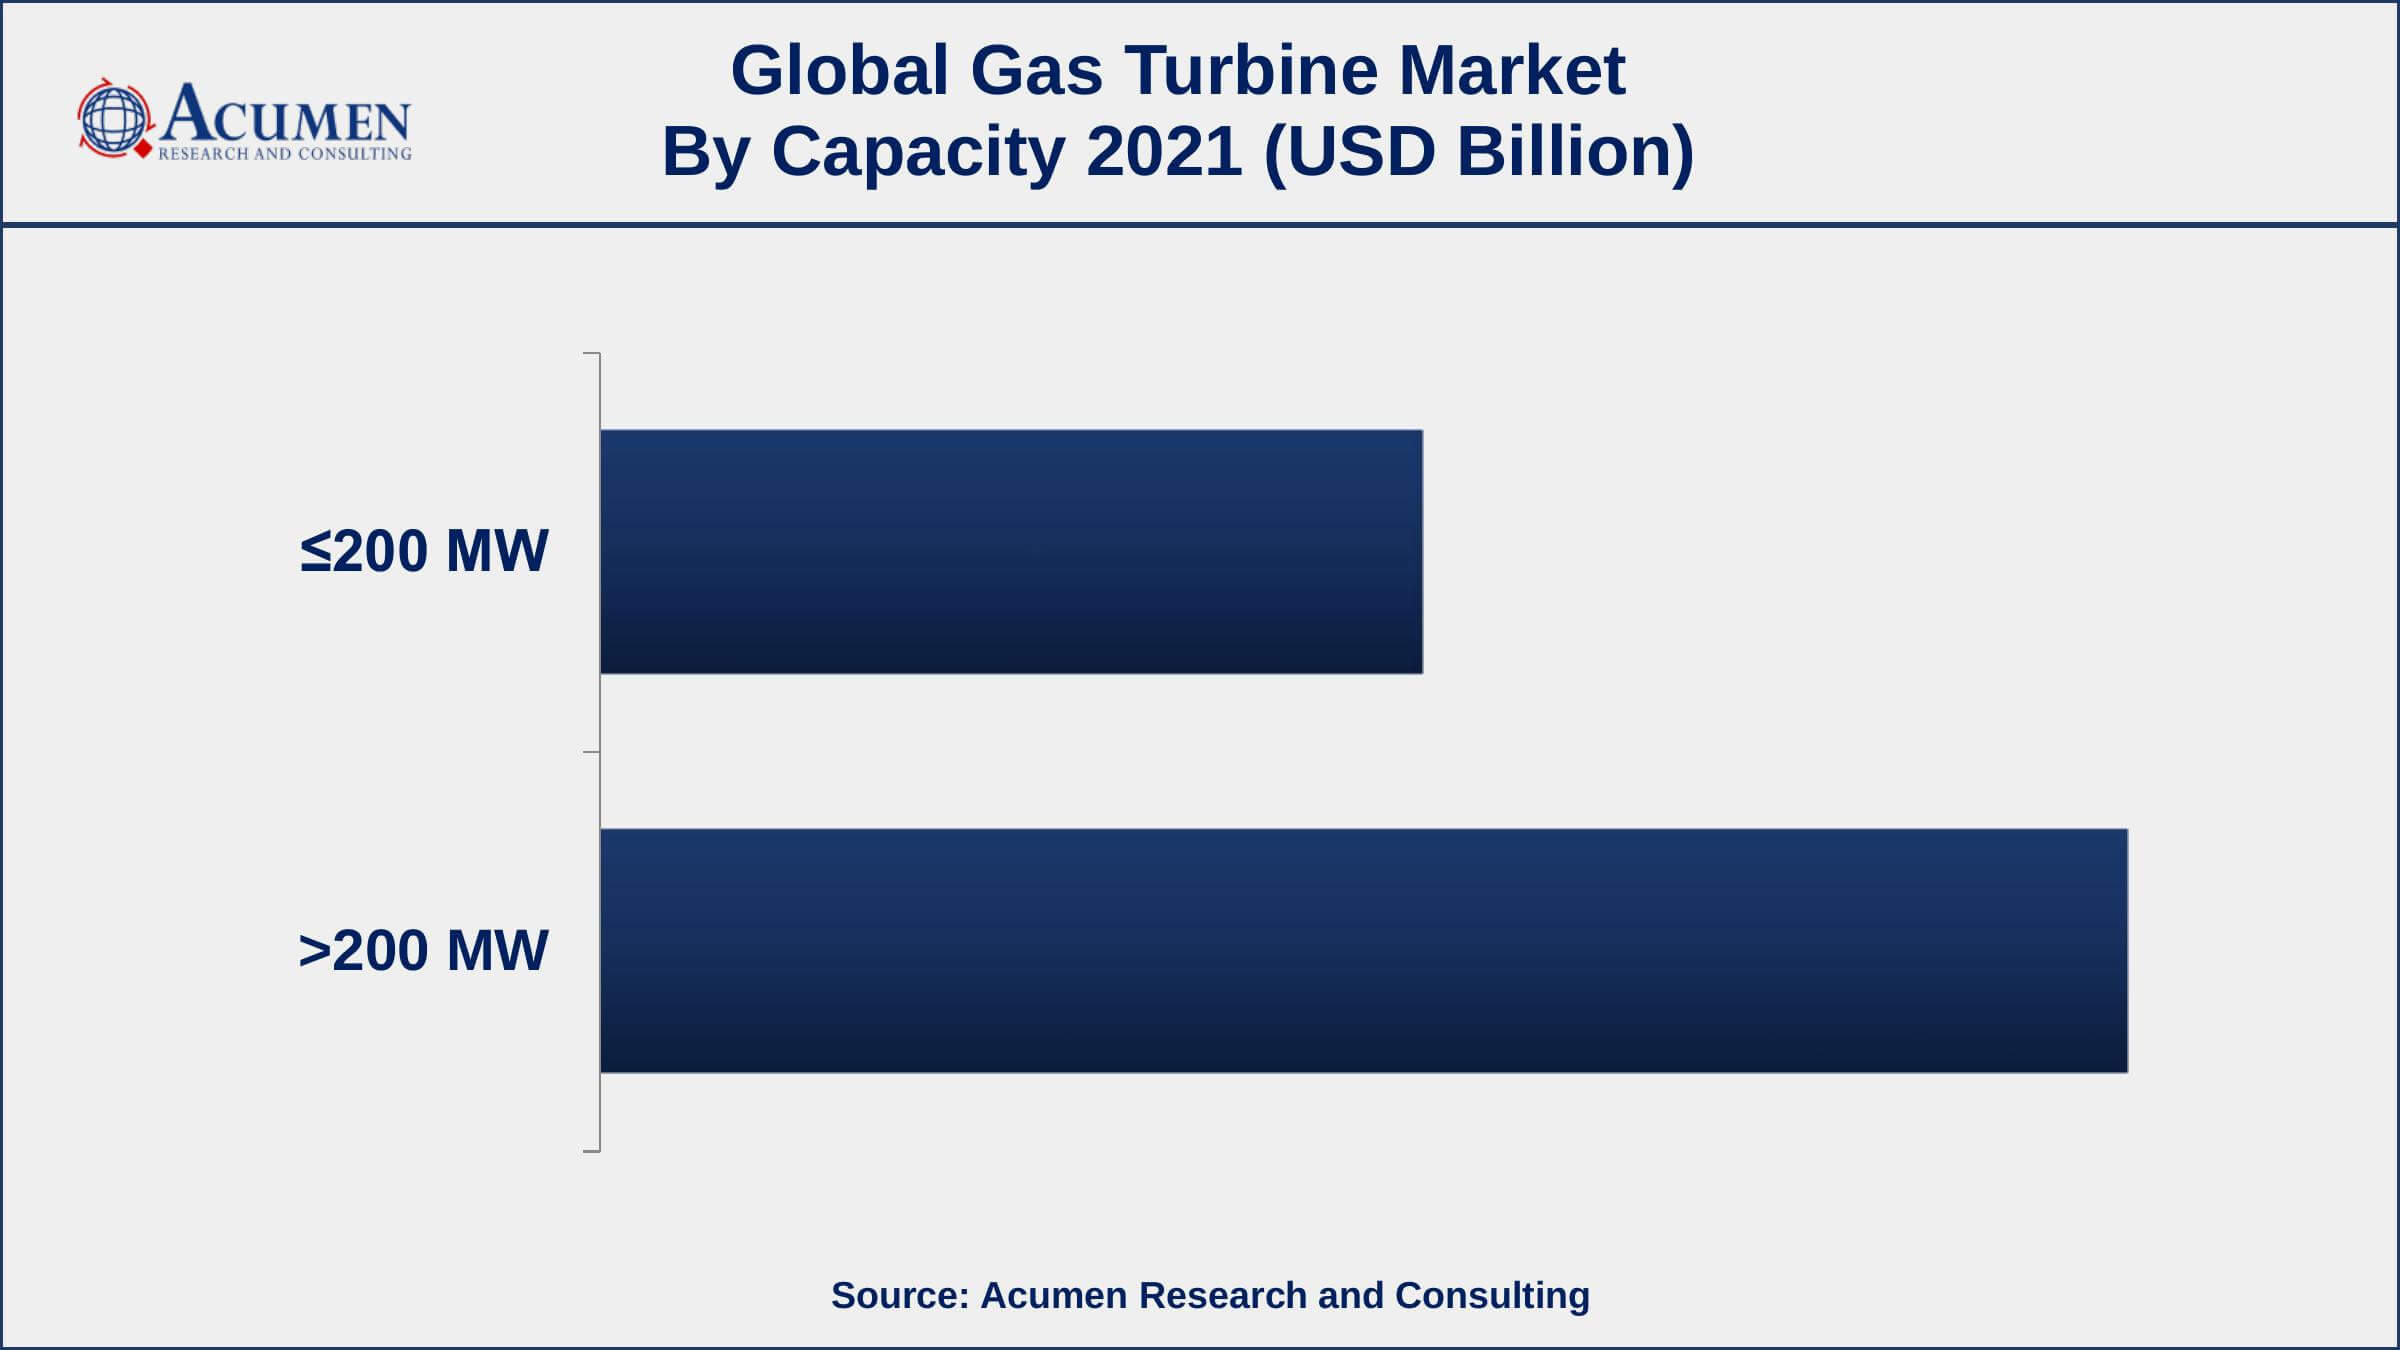 By capacity, the >200 MW segment has accounted market share of over 64% in 2021